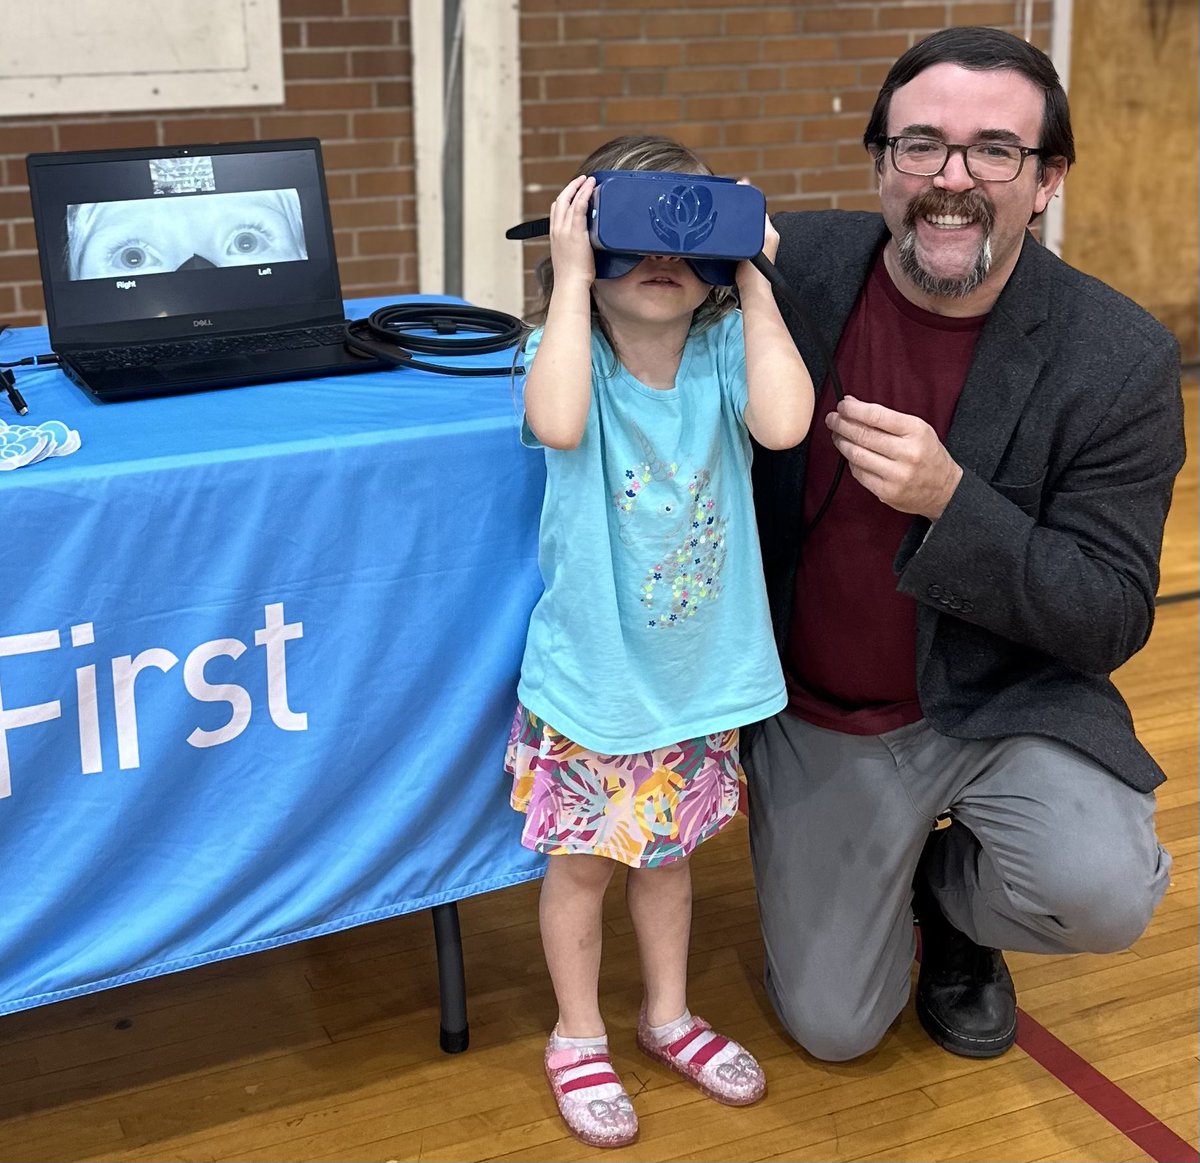 Science for all? Our CEO Patrick Esmonde was proud to show students at @Pennsbury_SD how an invention like infrared video goggles helps us to assess patients with vertigo and imbalance. Even his niece approves! #VestibularRehabilitation #scienceeducation